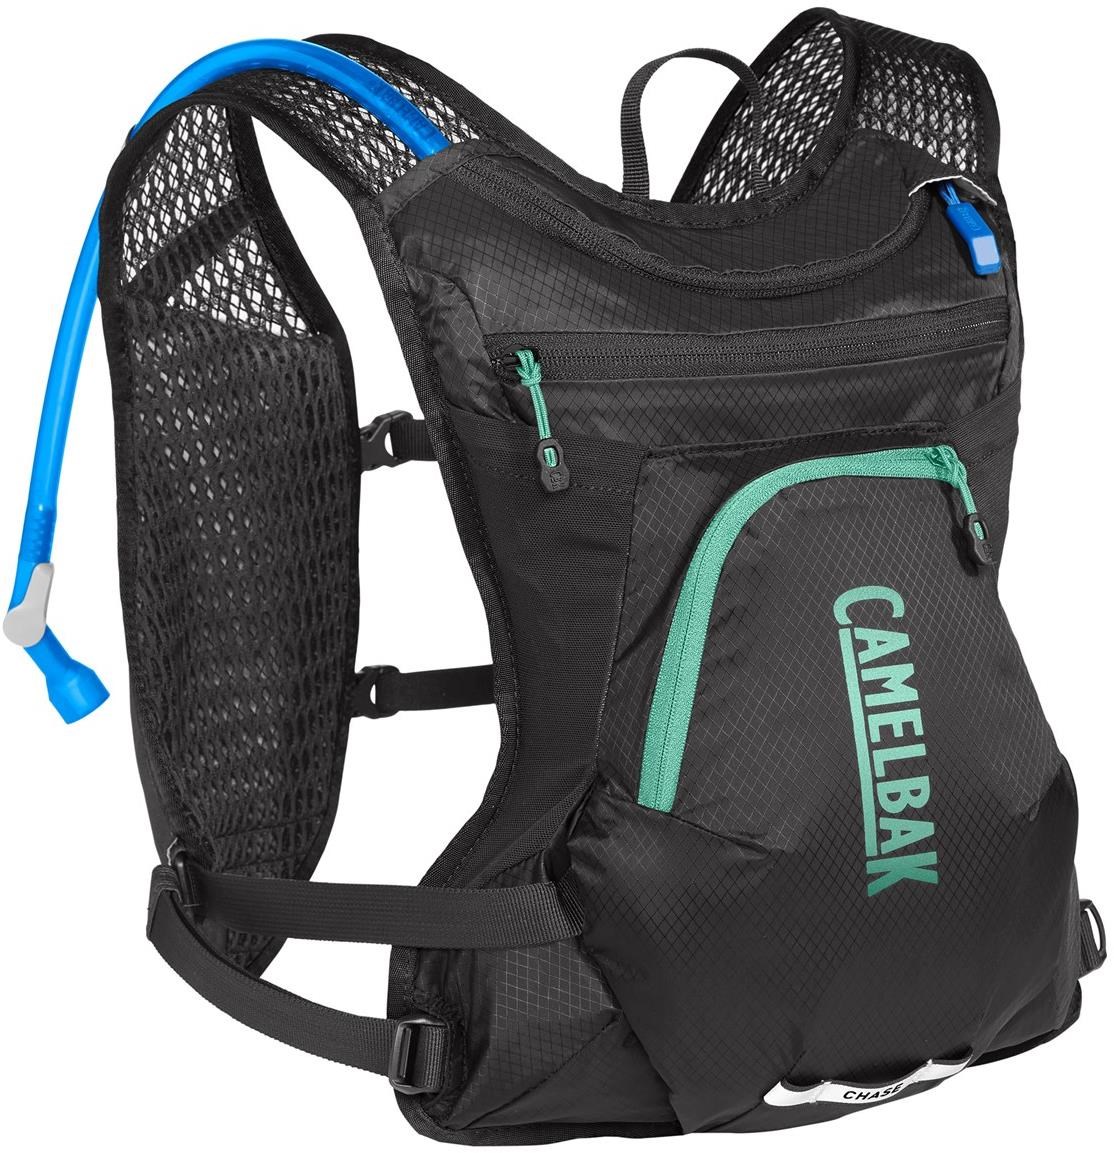 CamelBak Chase Bike Vest 4L Womens Hydration Pack Bag with 1.5L Reservoir product image